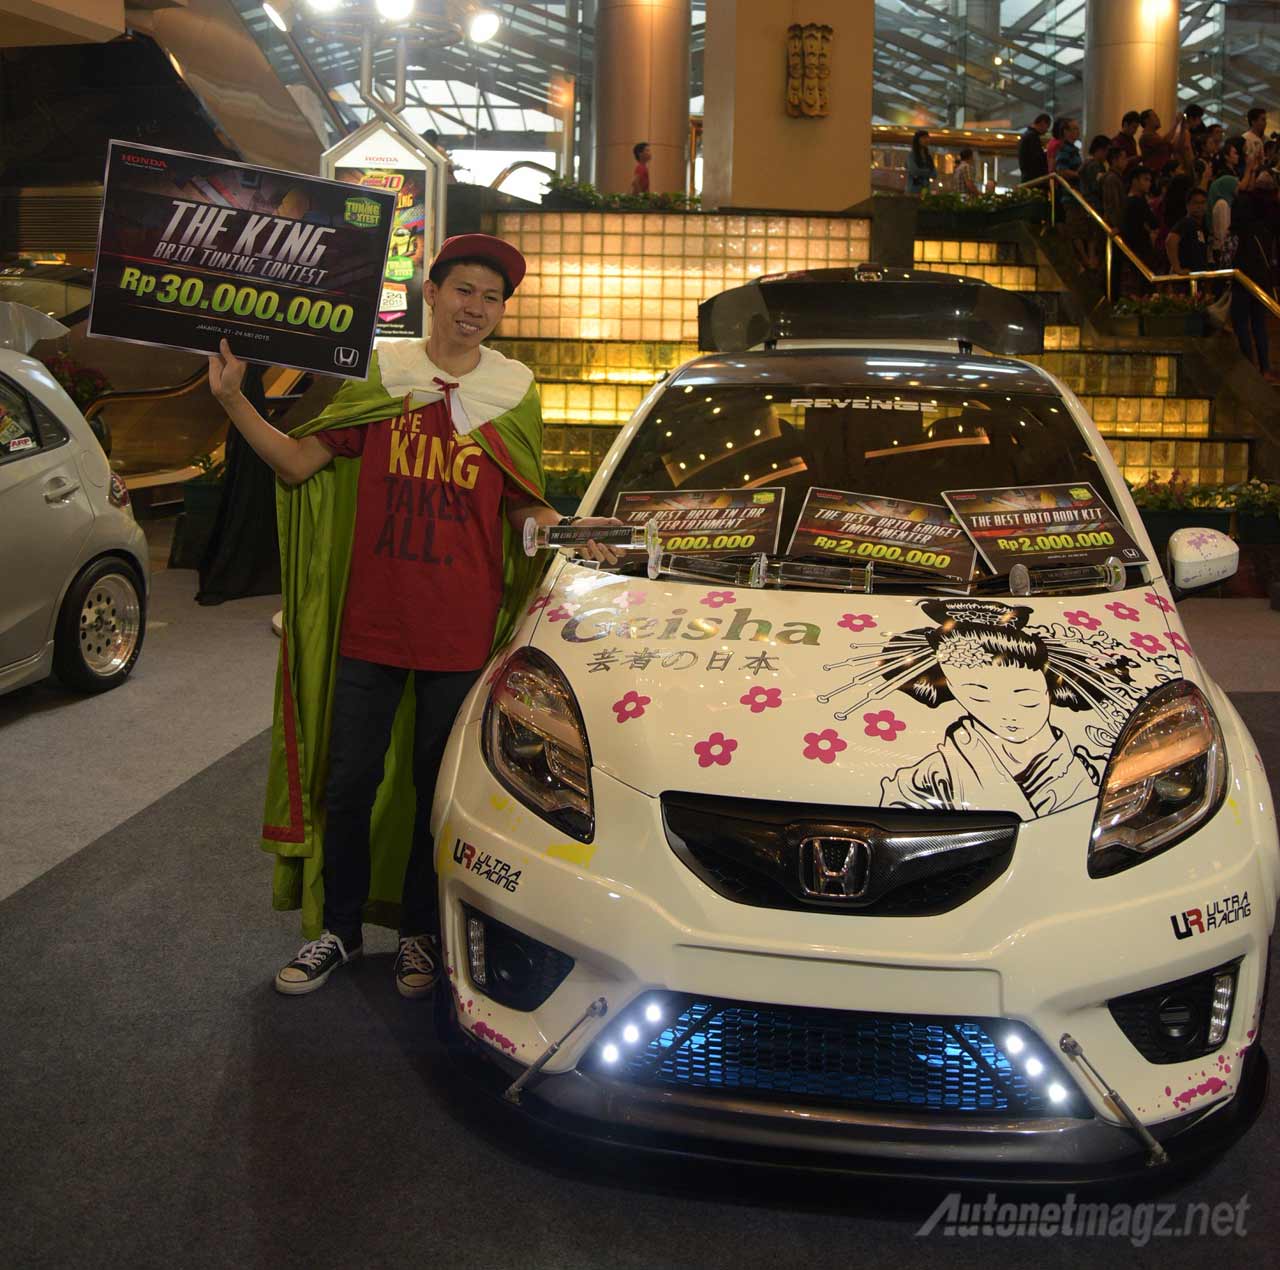 The King Brio Tuning Contest AutonetMagz Review Mobil Dan Motor